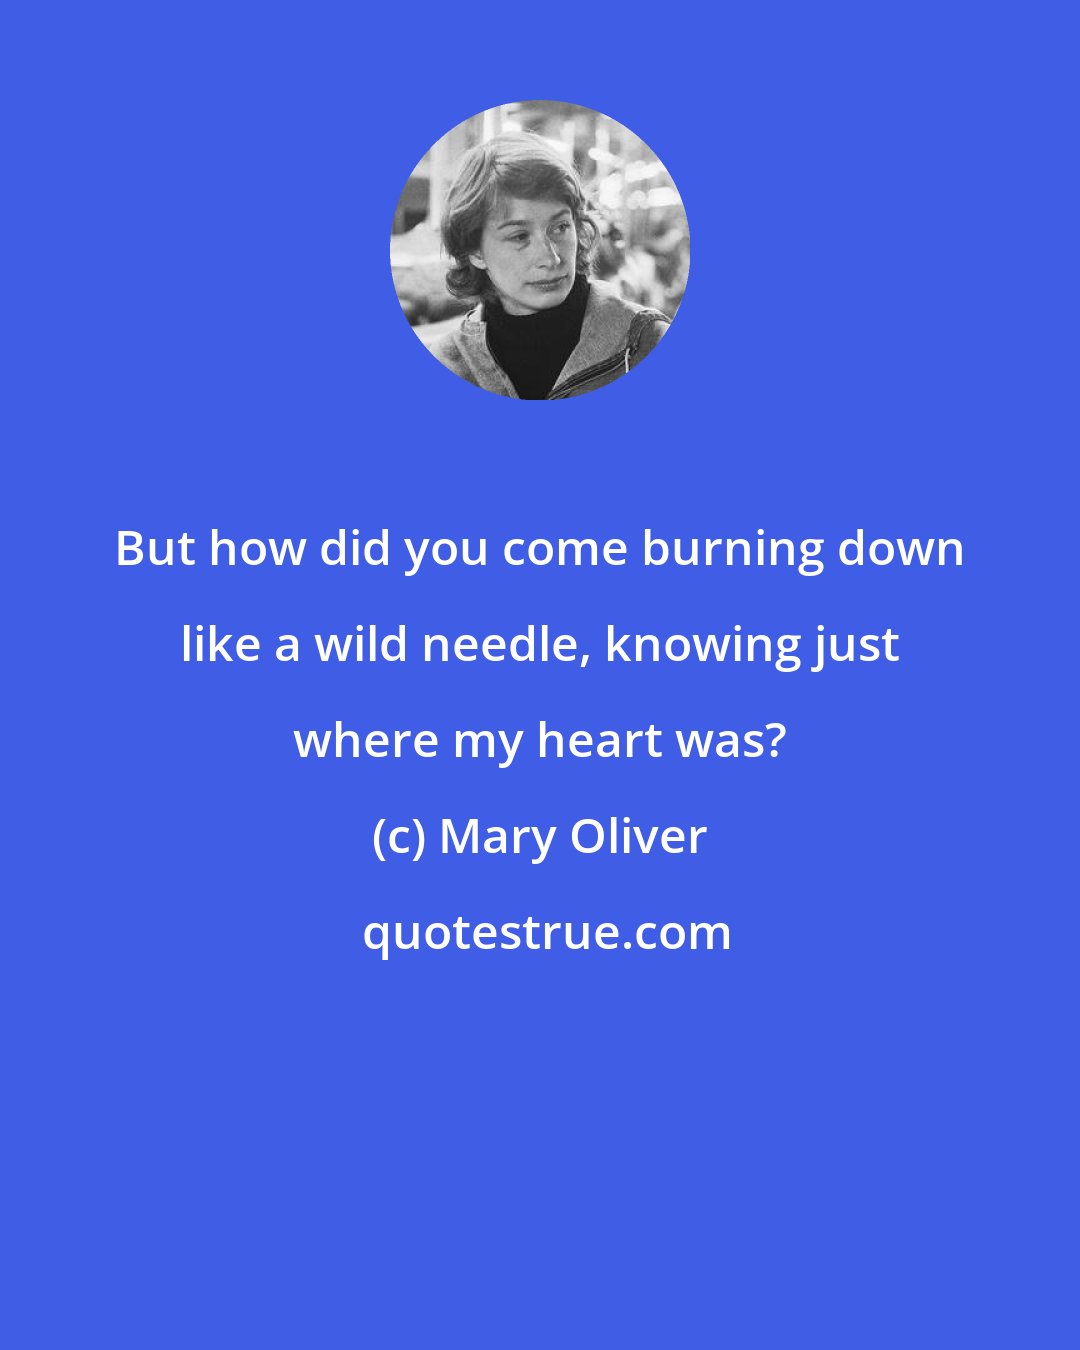 Mary Oliver: But how did you come burning down like a wild needle, knowing just where my heart was?